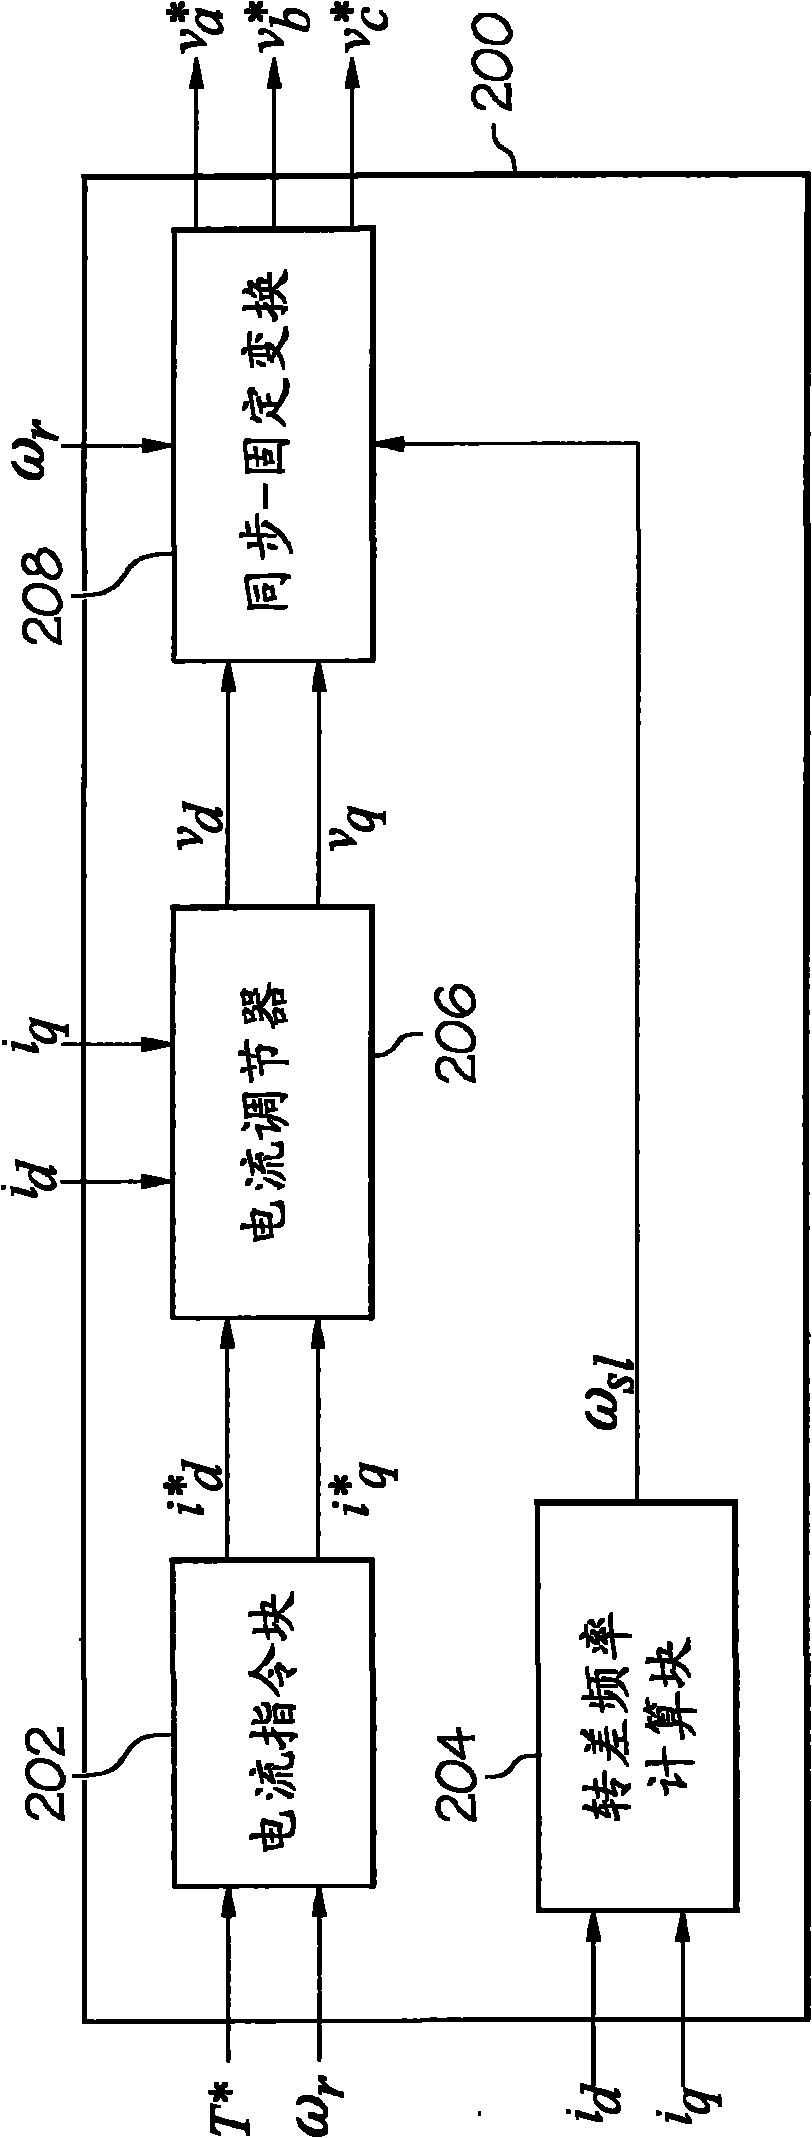 Torque production in an electric motor in response to current sensor error